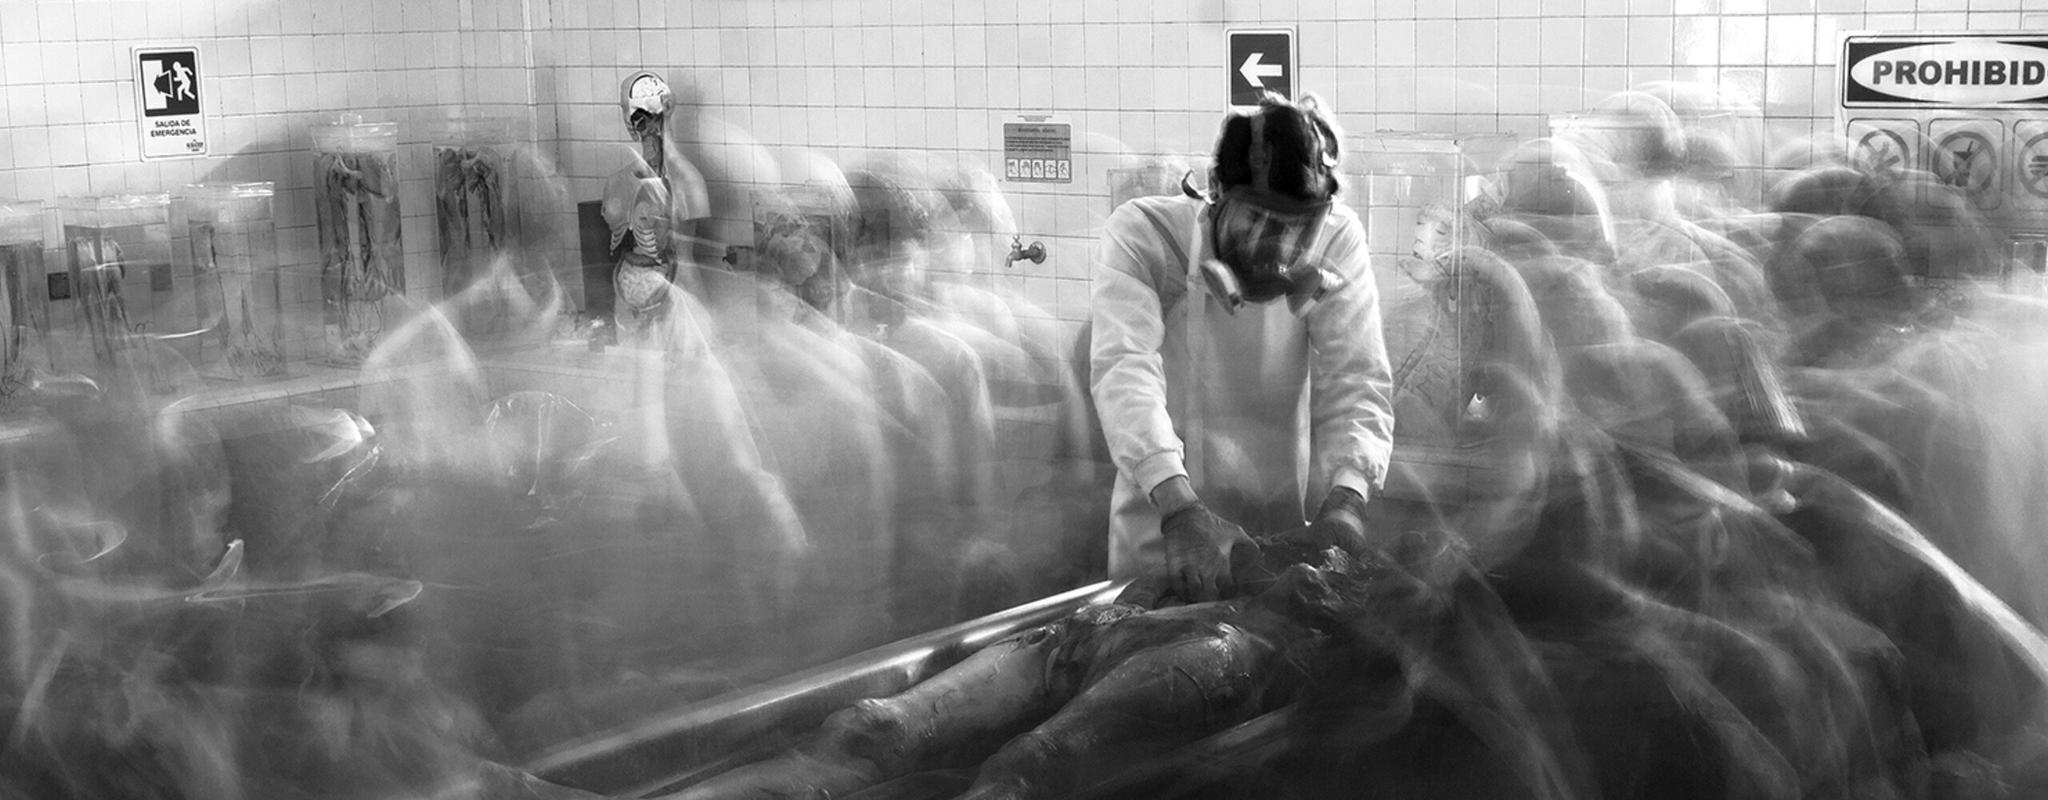 Man working in the university teaching morgue in Medellin, Columbia, surrounded by ghostly images of other students